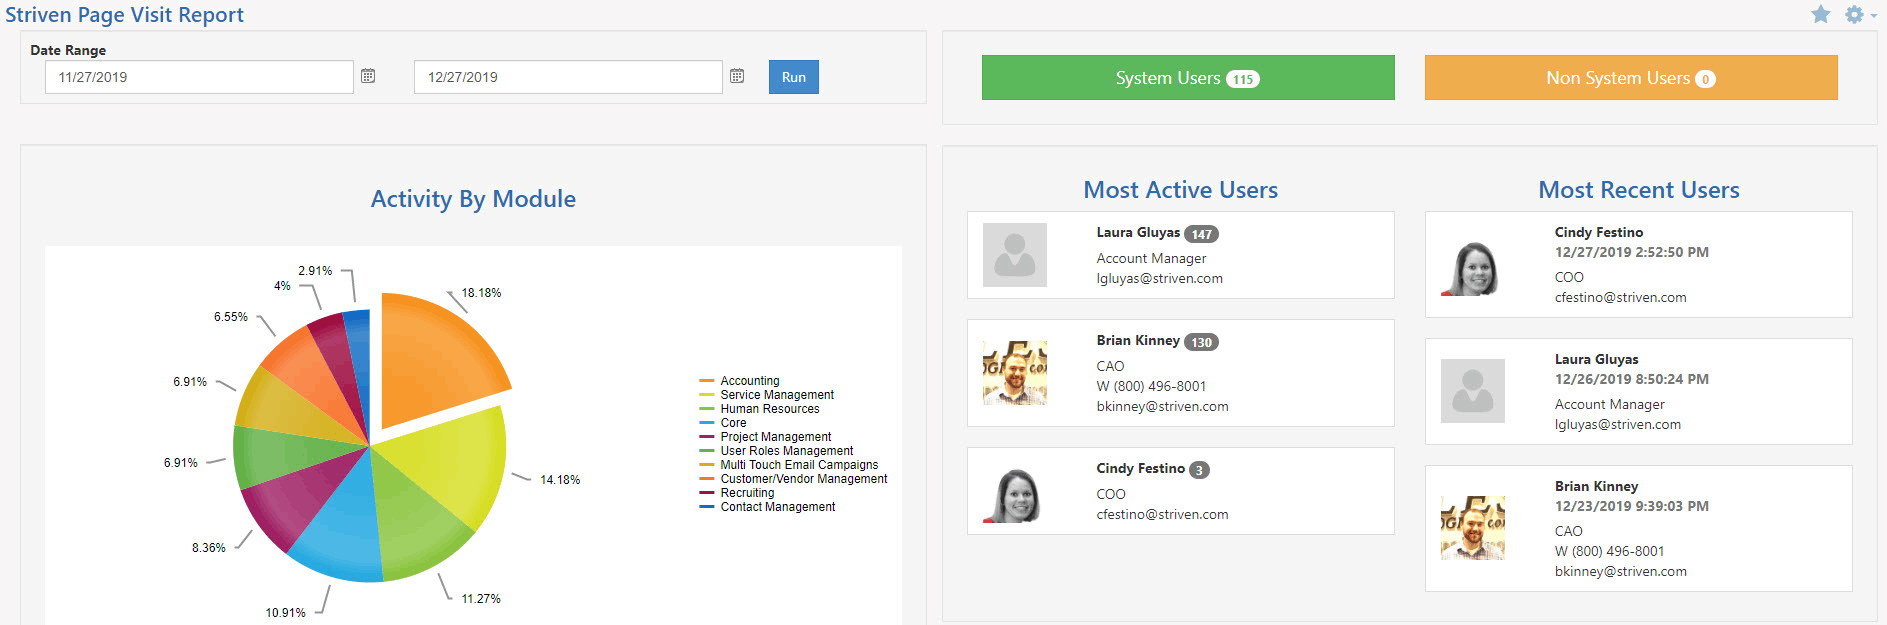 Striven Page Visit Report displaying date range, activity by module in pie graph, system user count, non-system user count, most active users, and most recent users